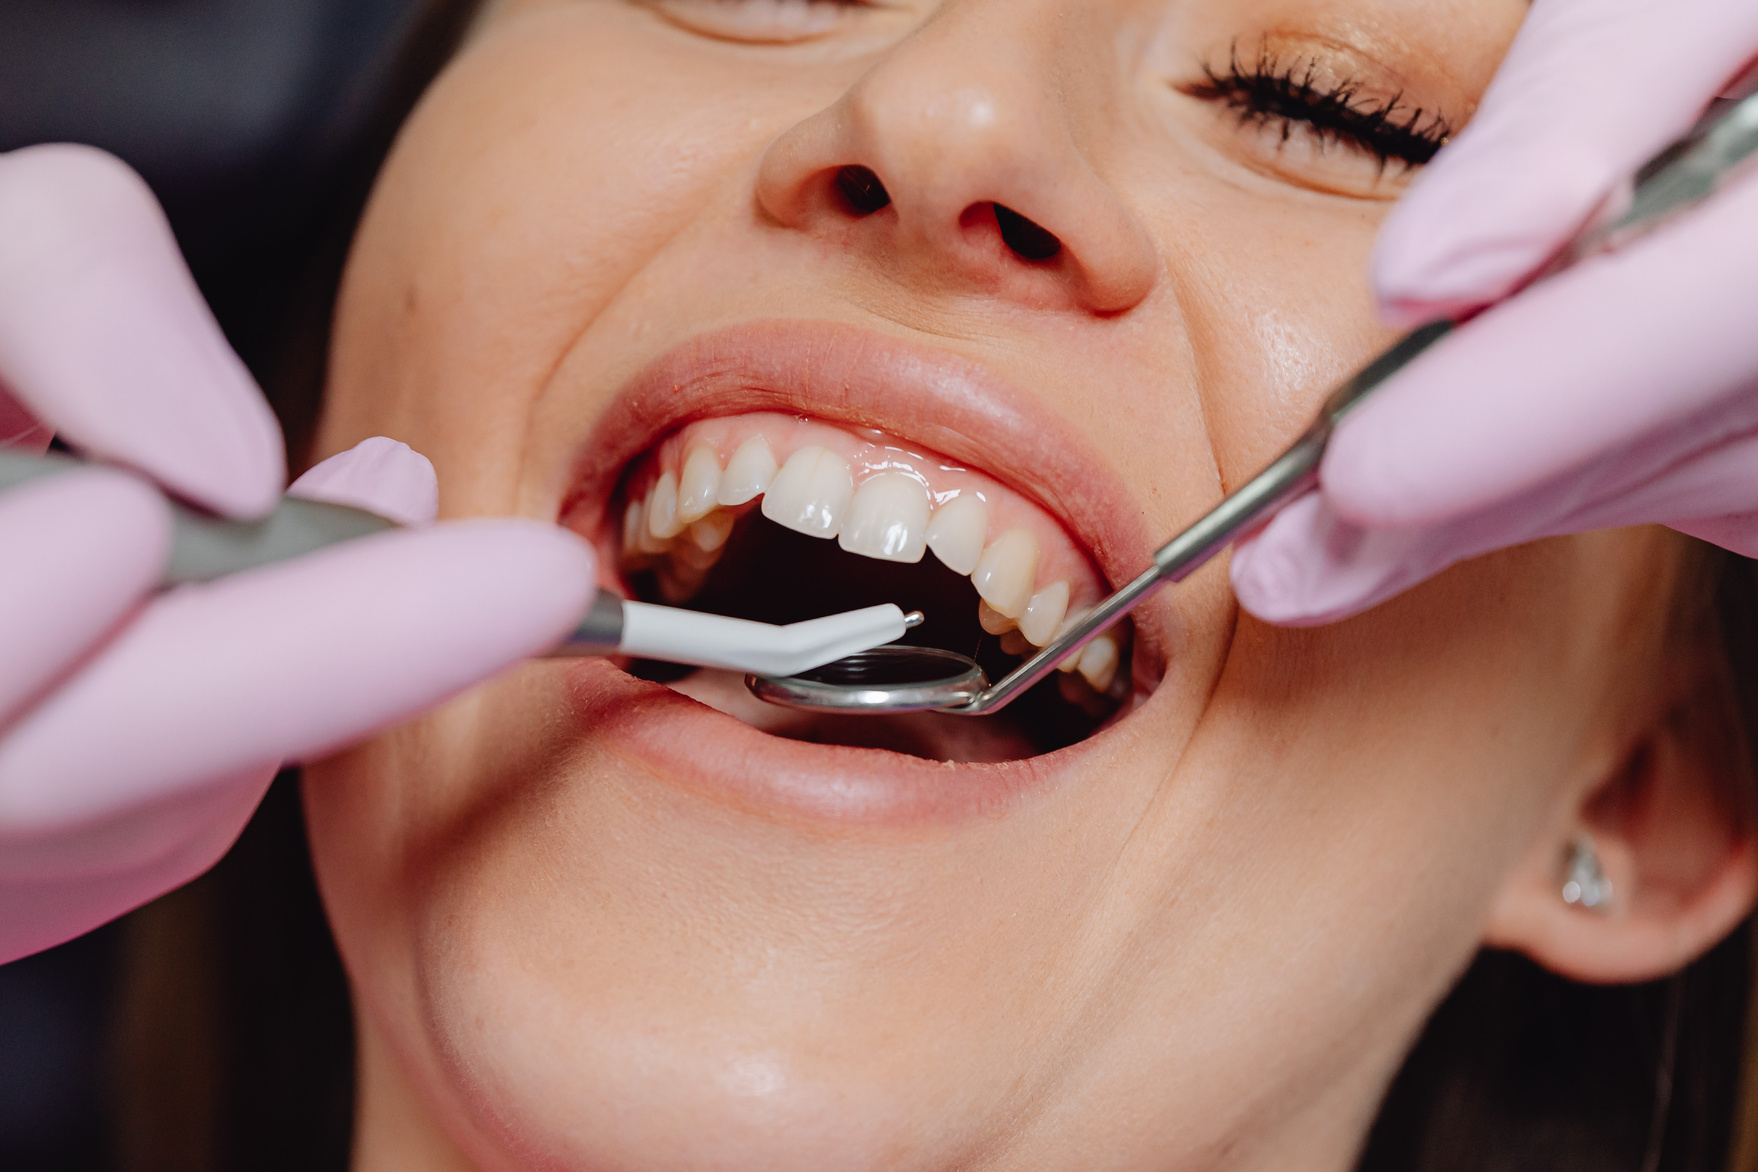  Opened Mouth Woman During Dental Treatment